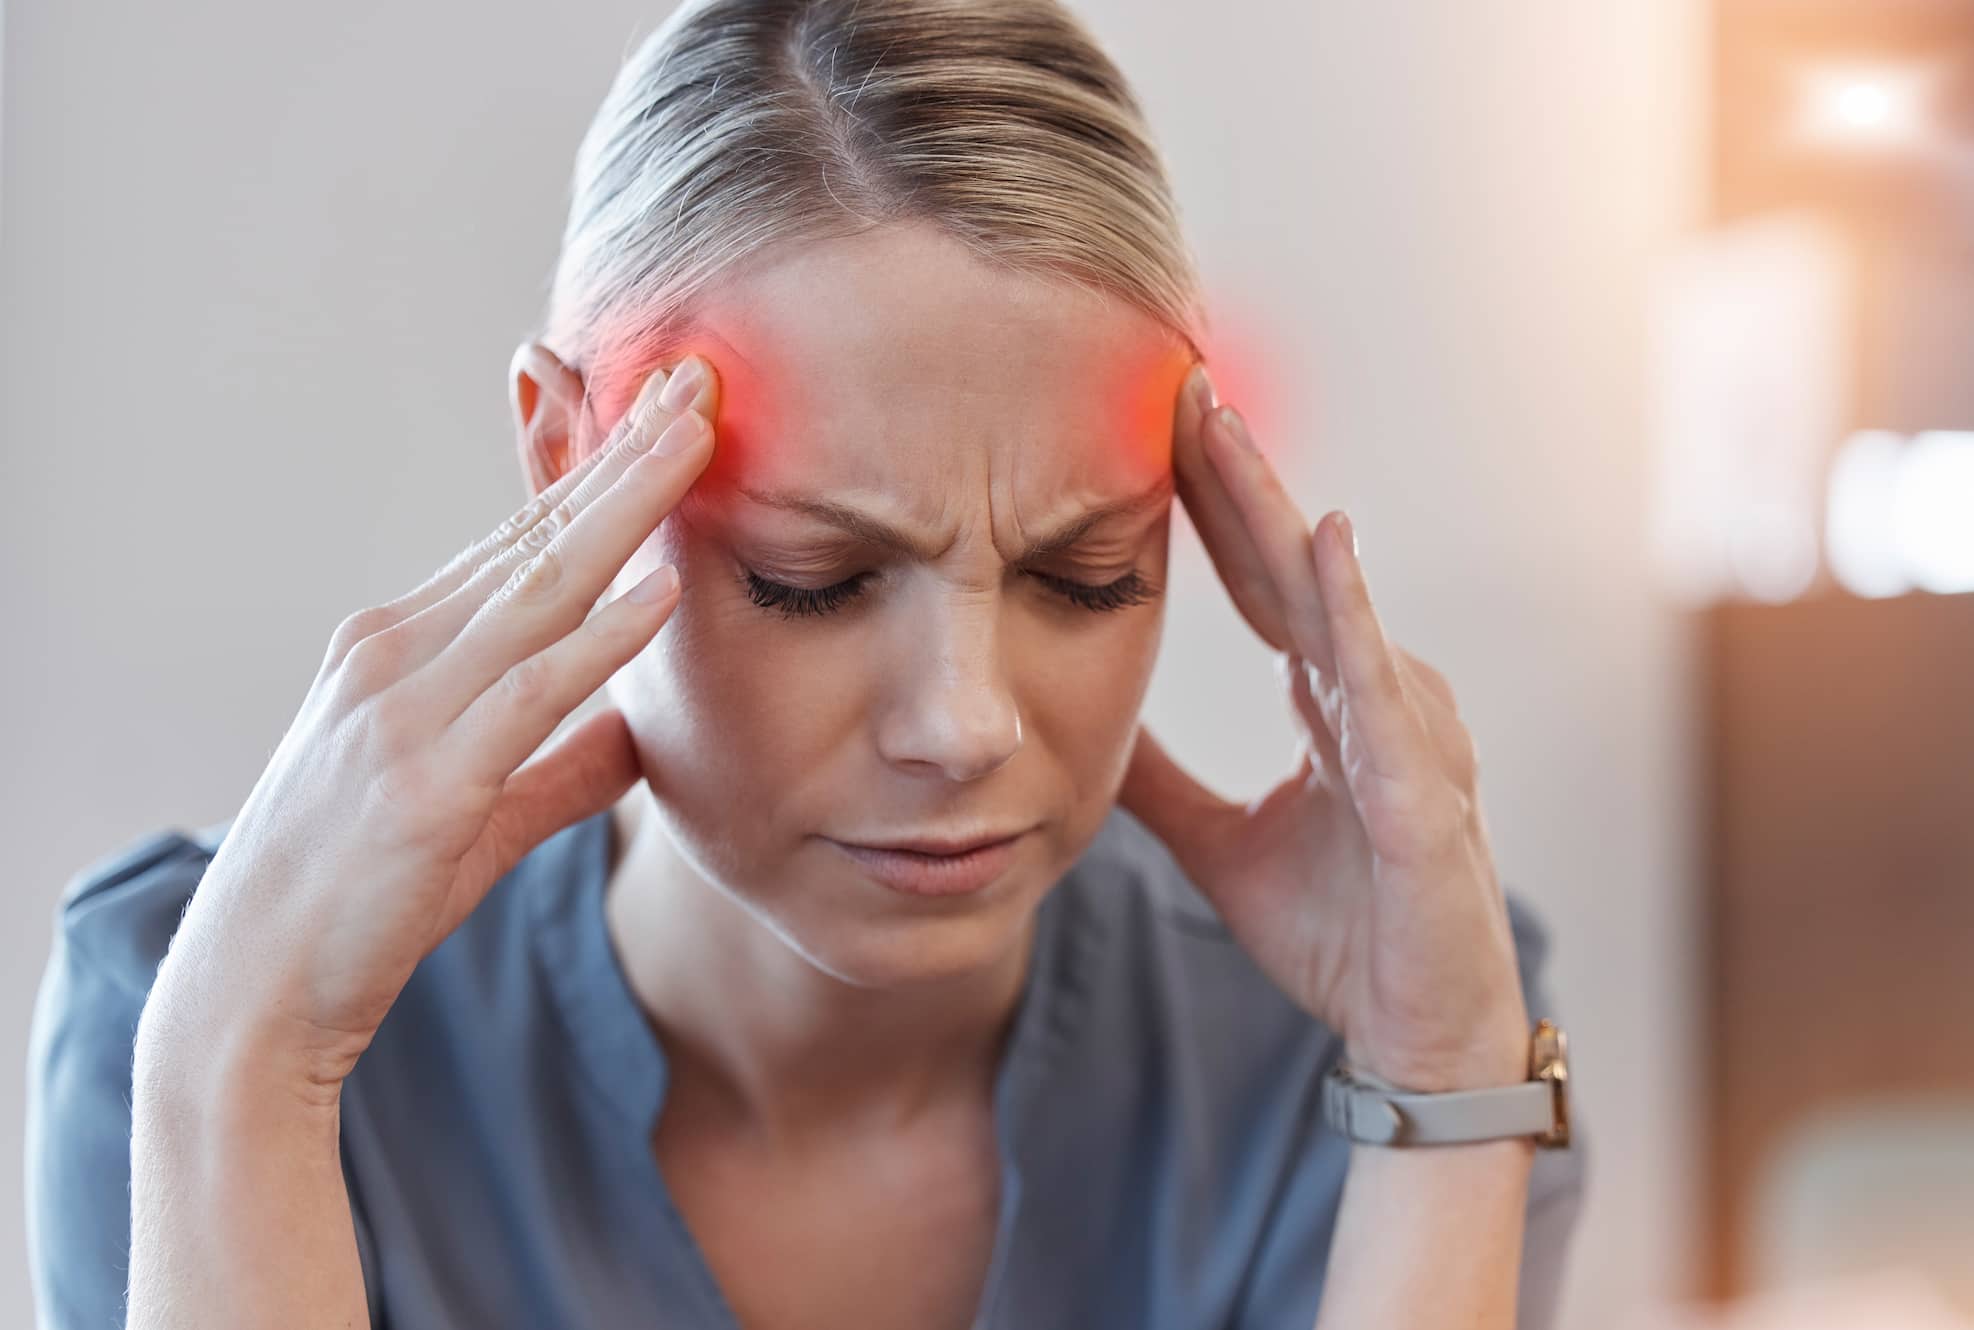 Foods to Stop Headache or Migraine Attack